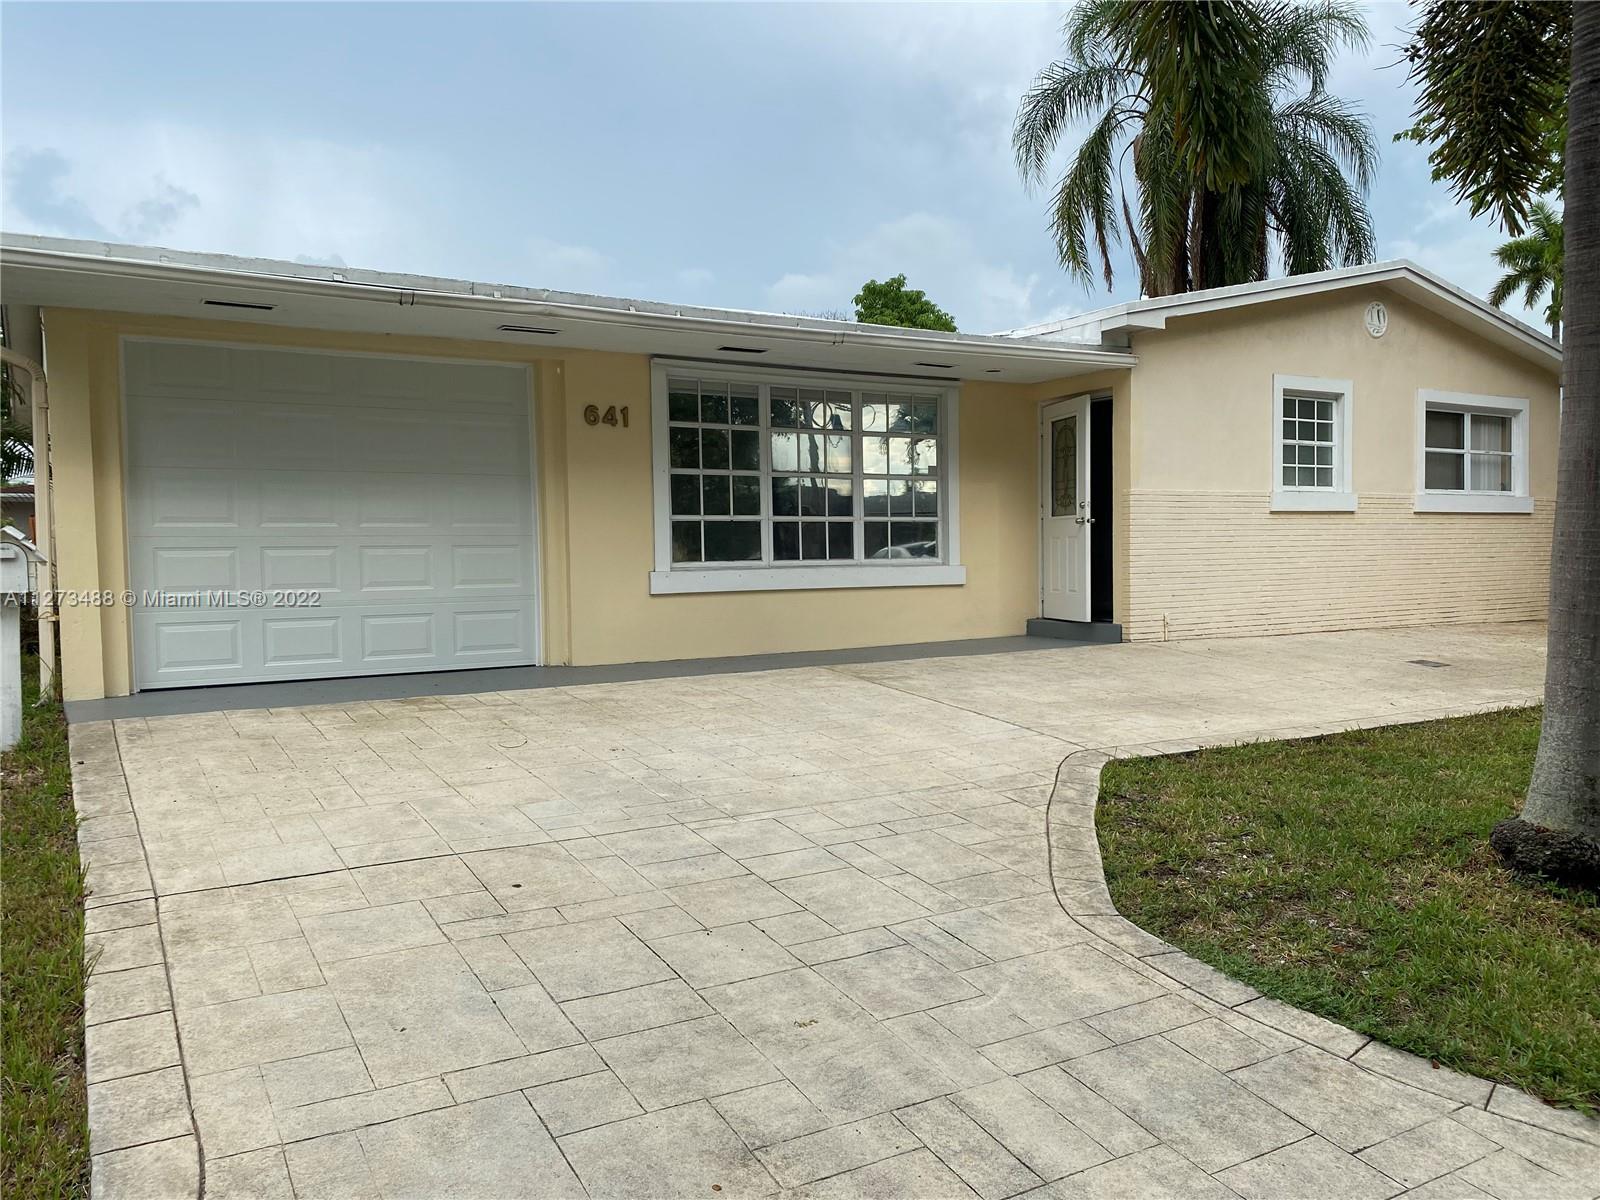 LIVE IN THE HEART OF HALLANDALE BEACH. VERY SPACIOUS SINGLE FAMILY HOME, 3/2, WITH AN OVERSIZED FAMILY ROOM ( COULD BE CONVERTED TO A FOURTH BEDROOM), WOOD LAMINATE FLOORS THROUGHOUT, HUGE LIVING/ WITH A FORMAL DINING ROOM, VERY SPACIUOS KITCHEN ( BRAND NEW REFRIGERATOR, AND RANGE OVEN STOVE. HOUSE HAS A SEPARATE LAUNDRY ROOM. CIRCULAR DRIVEWAY WITH A 1 CAR GARAGE. THIS IS A CORNER HOME, WITH AN OVERSIZED LOT. MASTER BEDROOM HAS FRENCH DOORS THAT LEAD OUT TO A WOODEN DECK TO YARD. NO HOA.